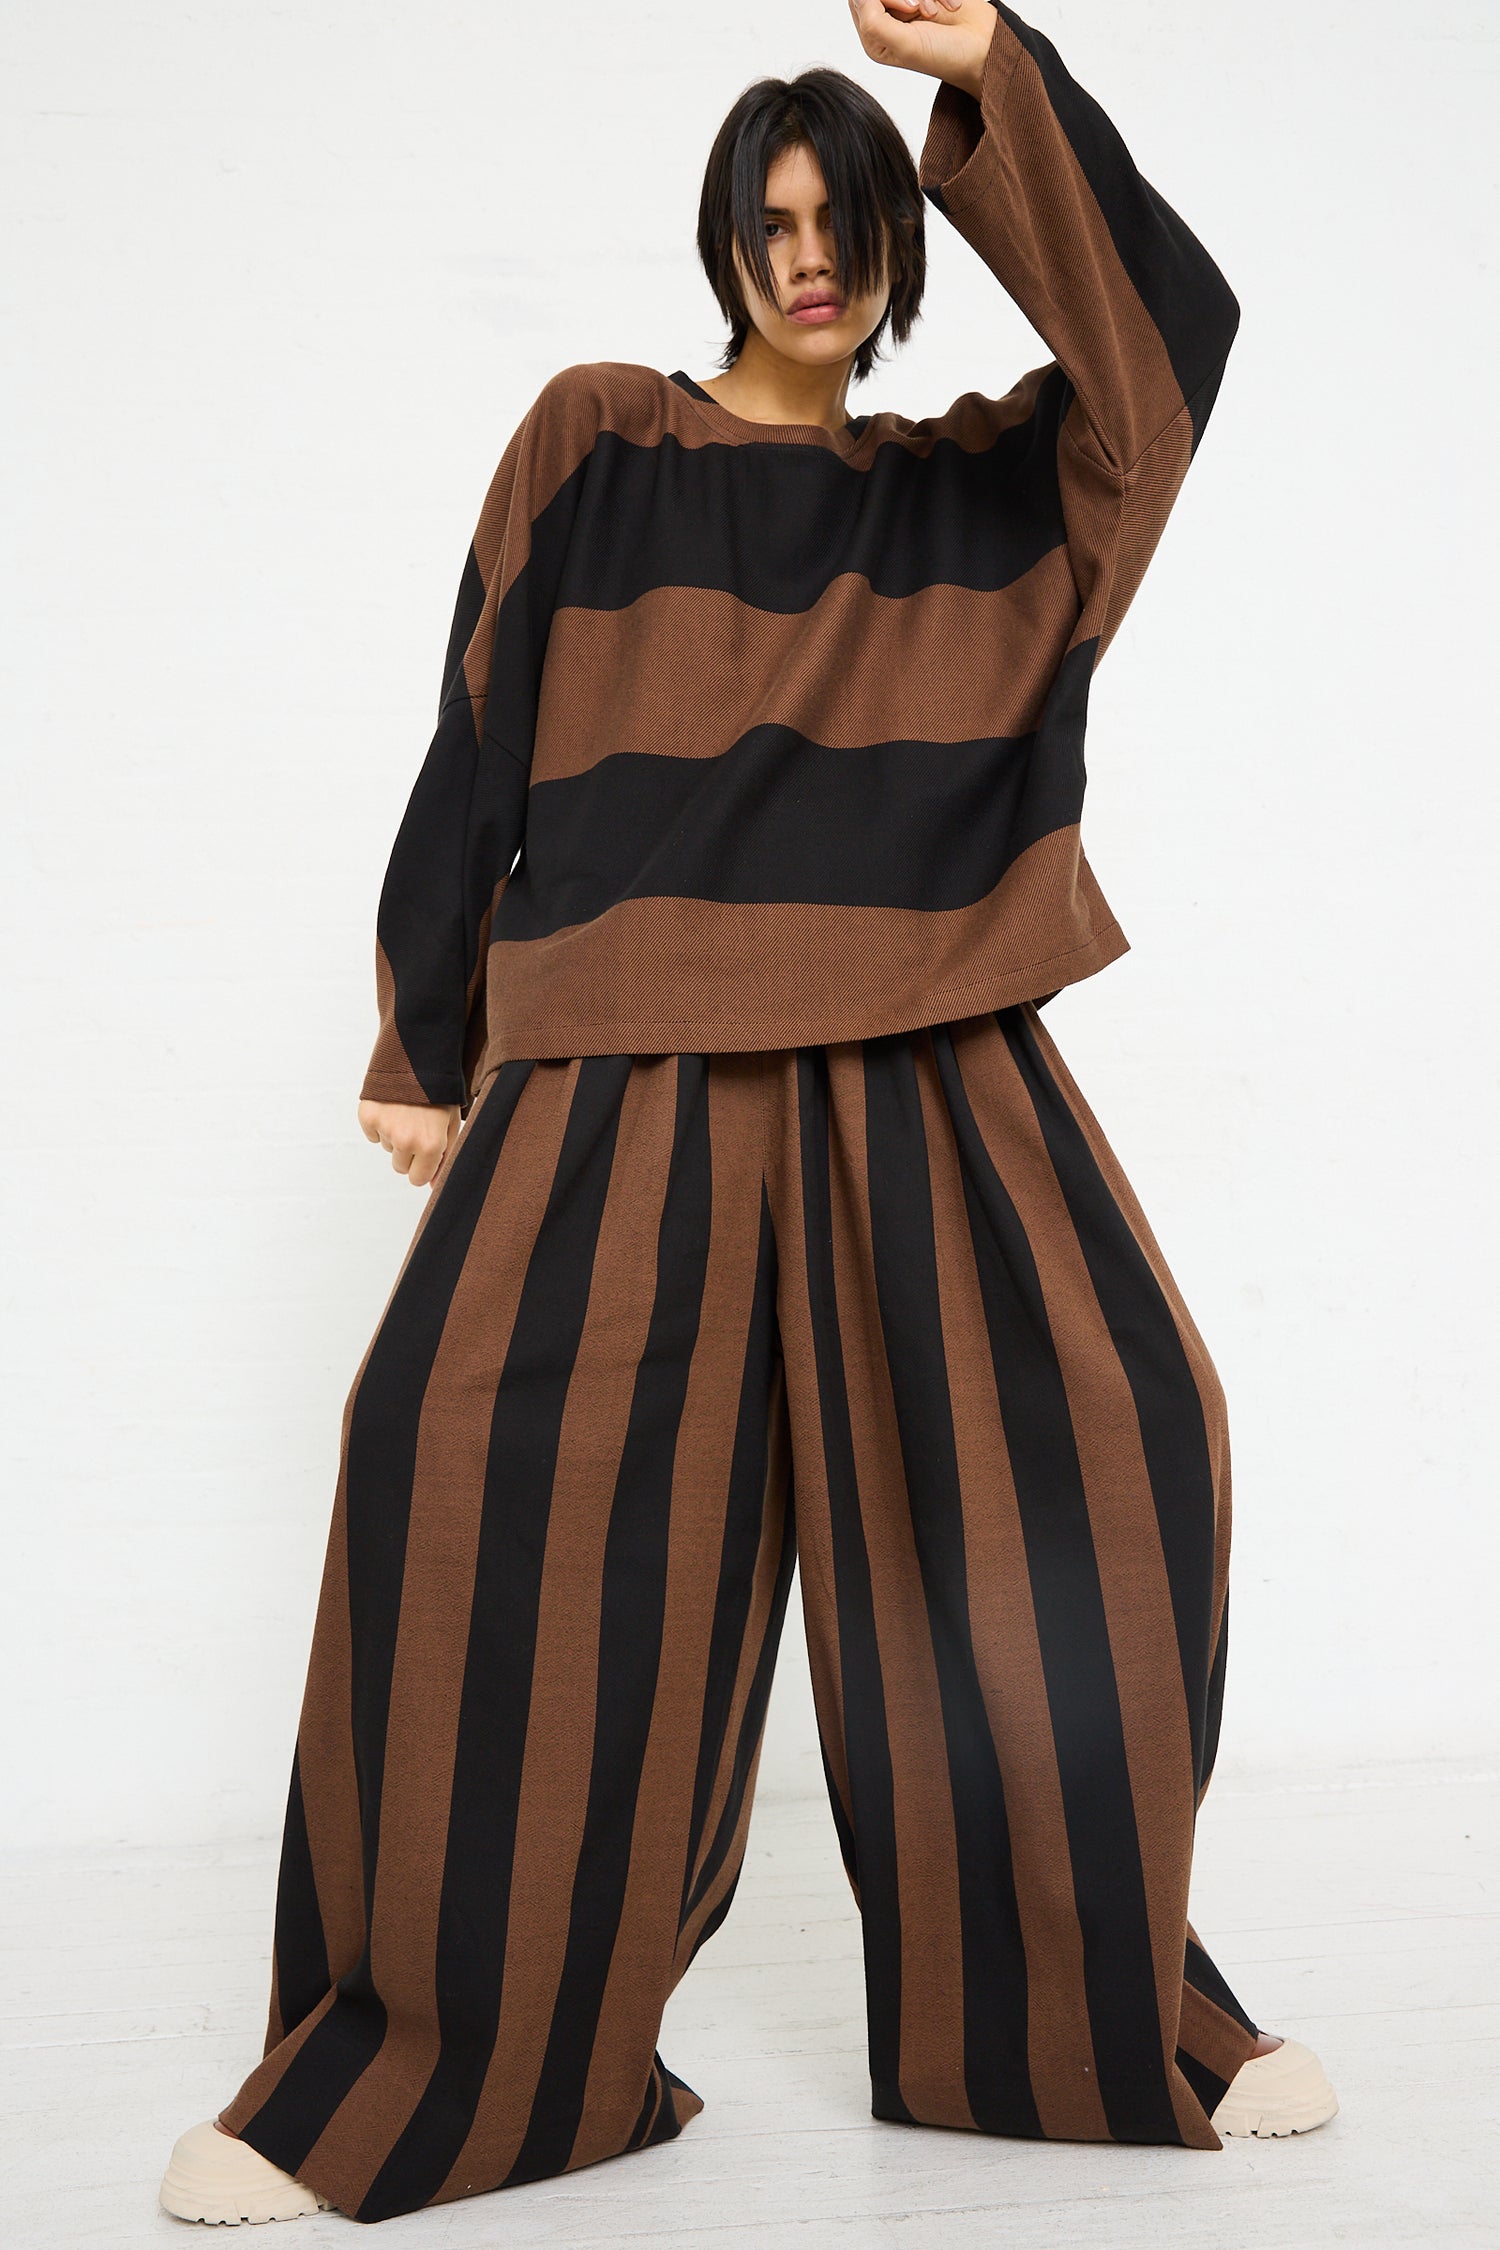 A model wearing the Drawstring Pleated Pant in Black and Brown Stripe by Marrakshi Life - OROBORO NYC